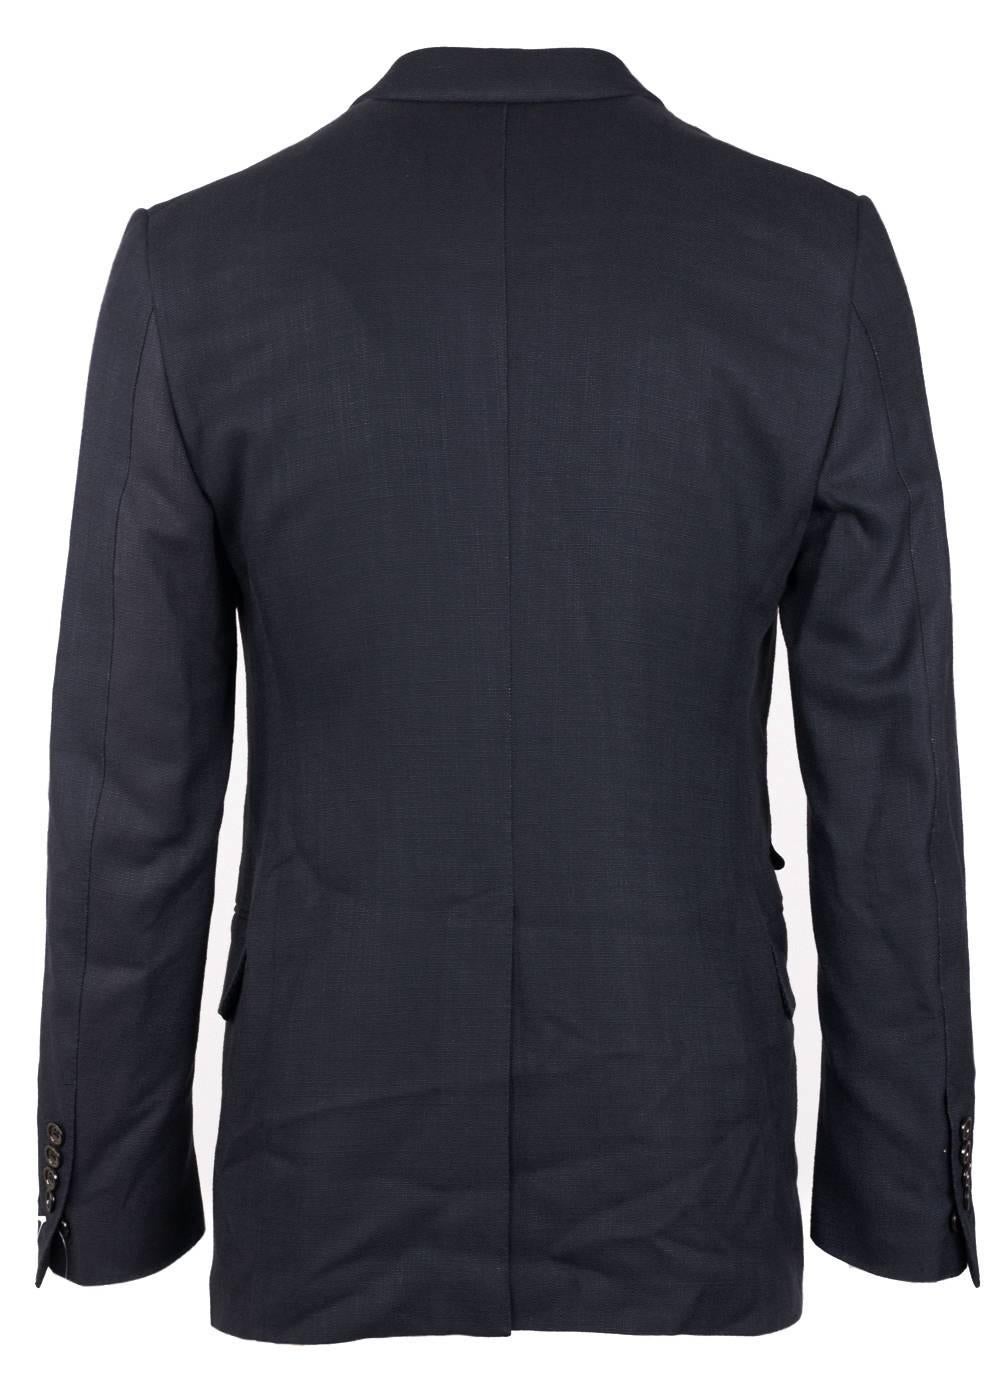 The signature Tom Ford Shelton Jacket updated in a viscose textile. This constructed Shelton Base jacket is finished with notch lapels, flap pockets and a double breasted silhouette. The jacket is unique in a black shade with slight charcoal